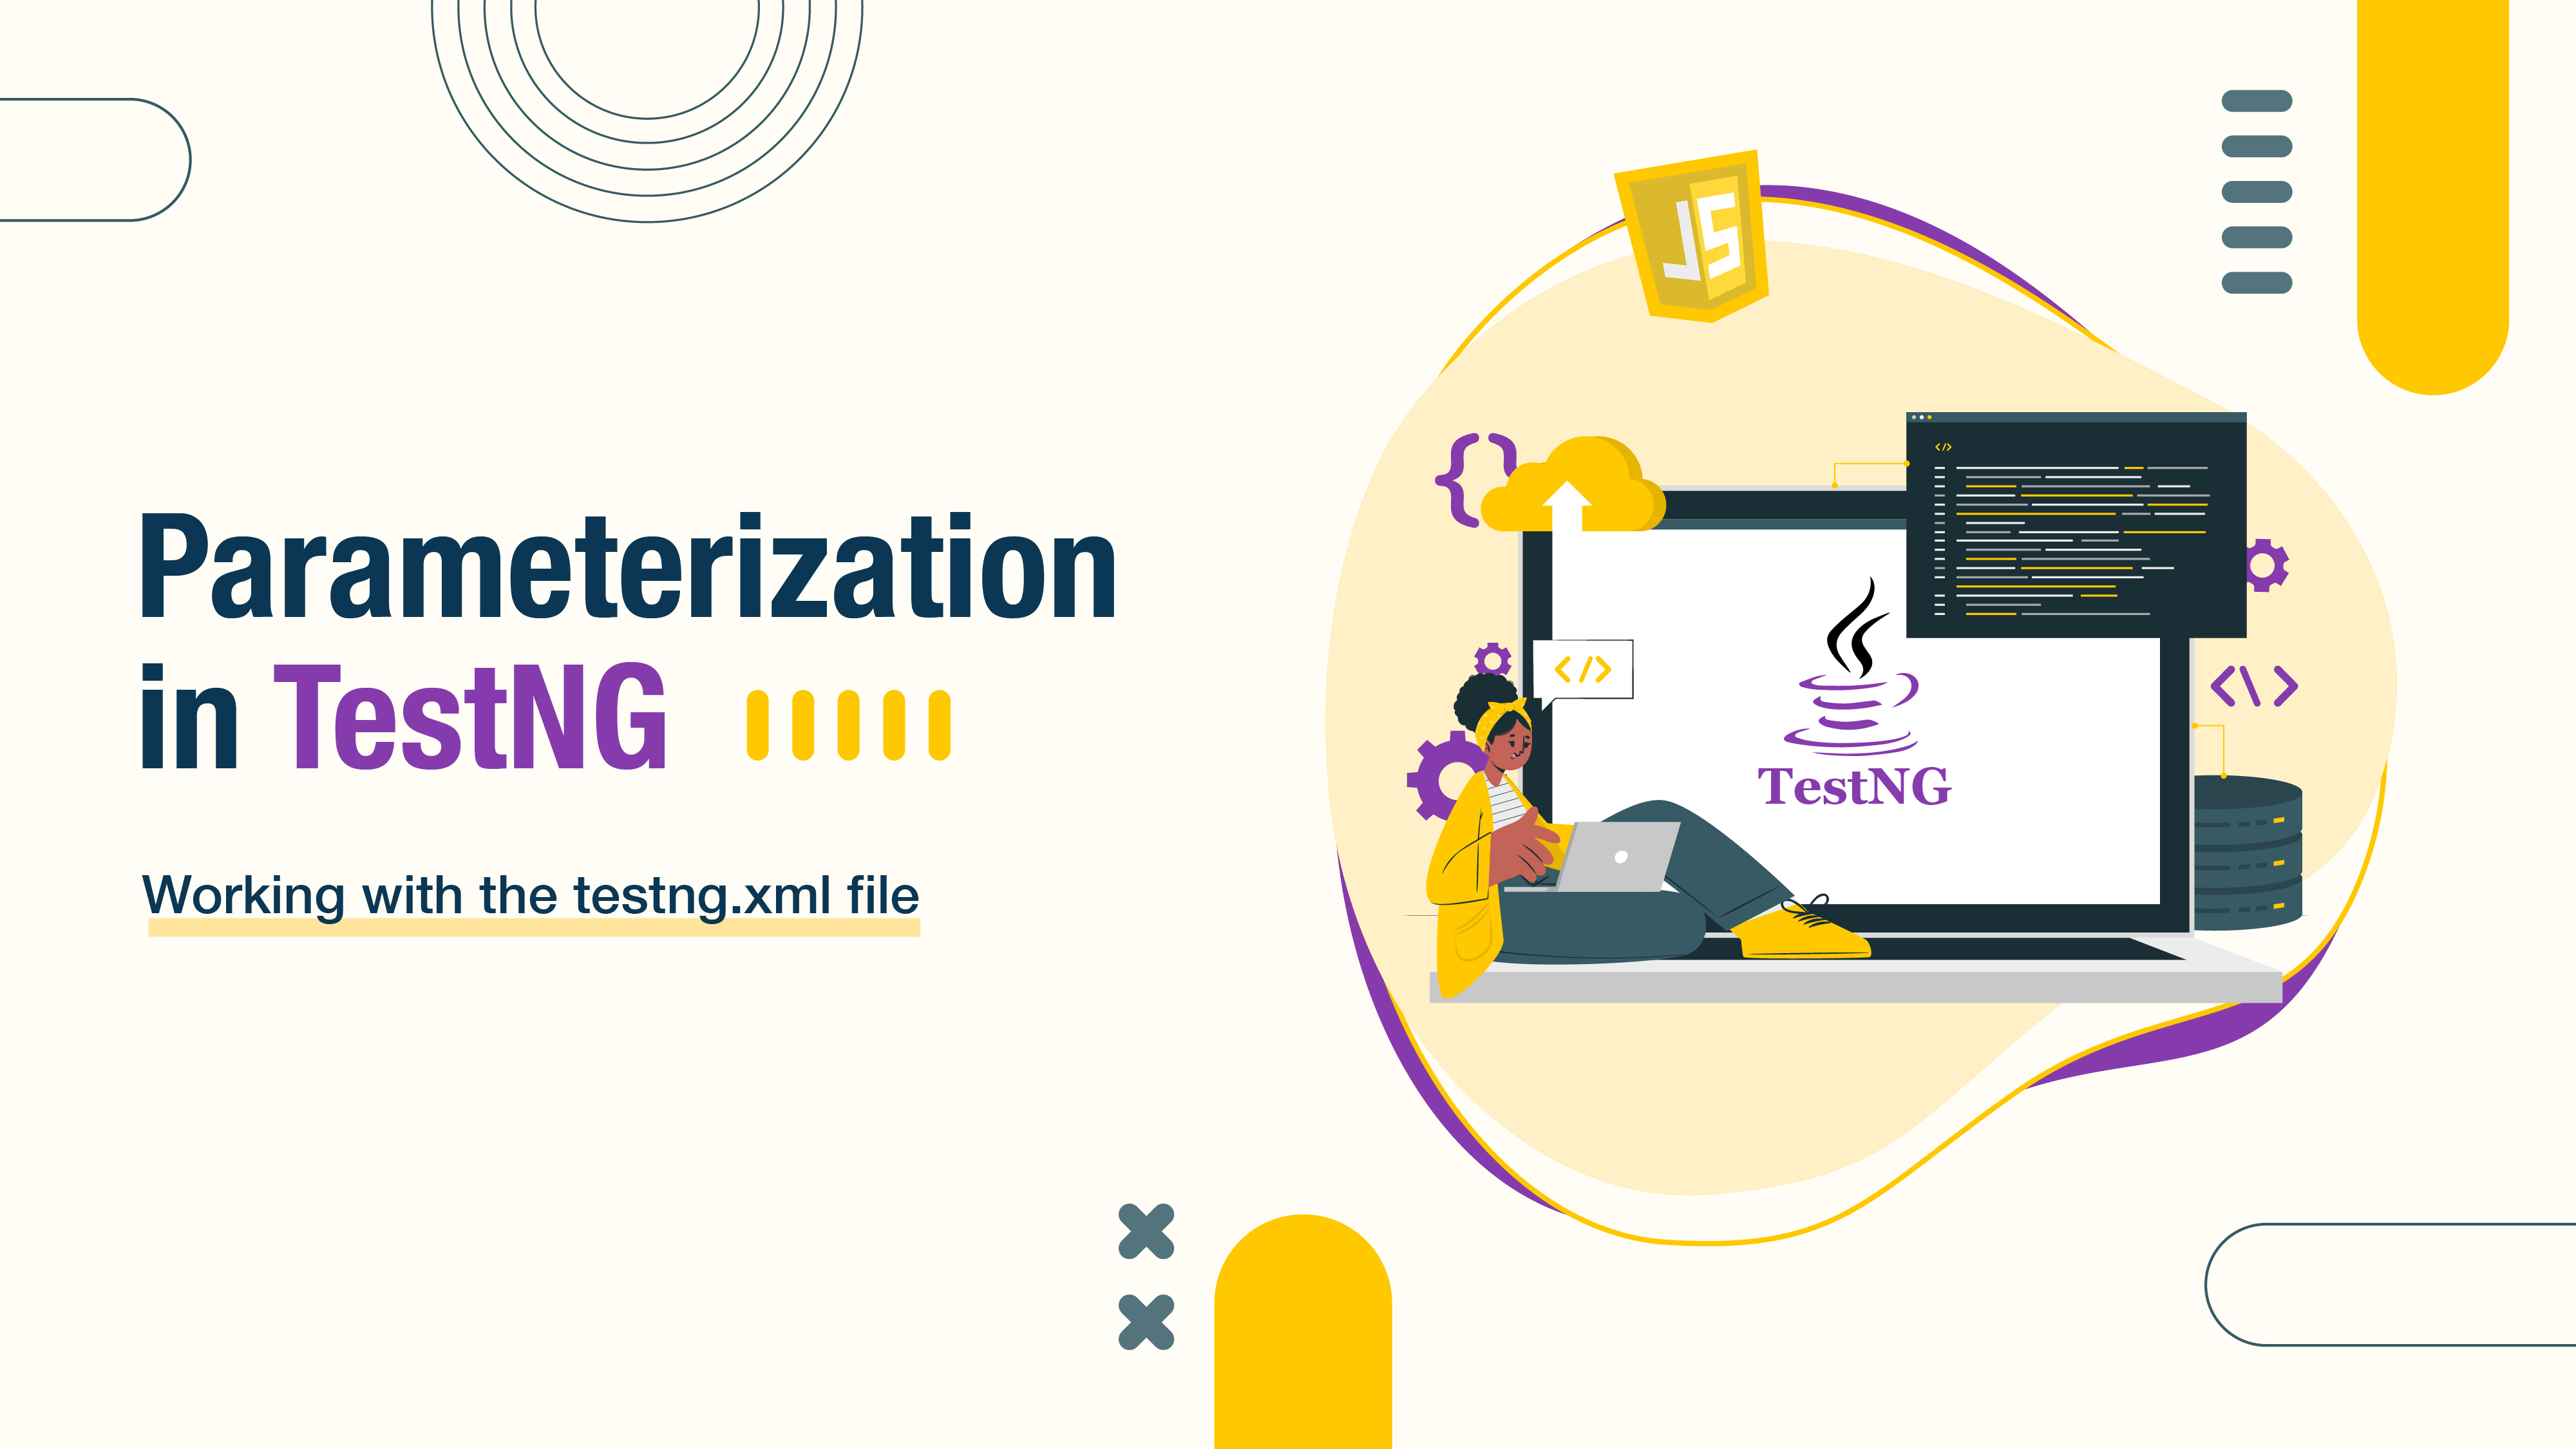 Parameterization in TestNG - Working with the testng.xml file